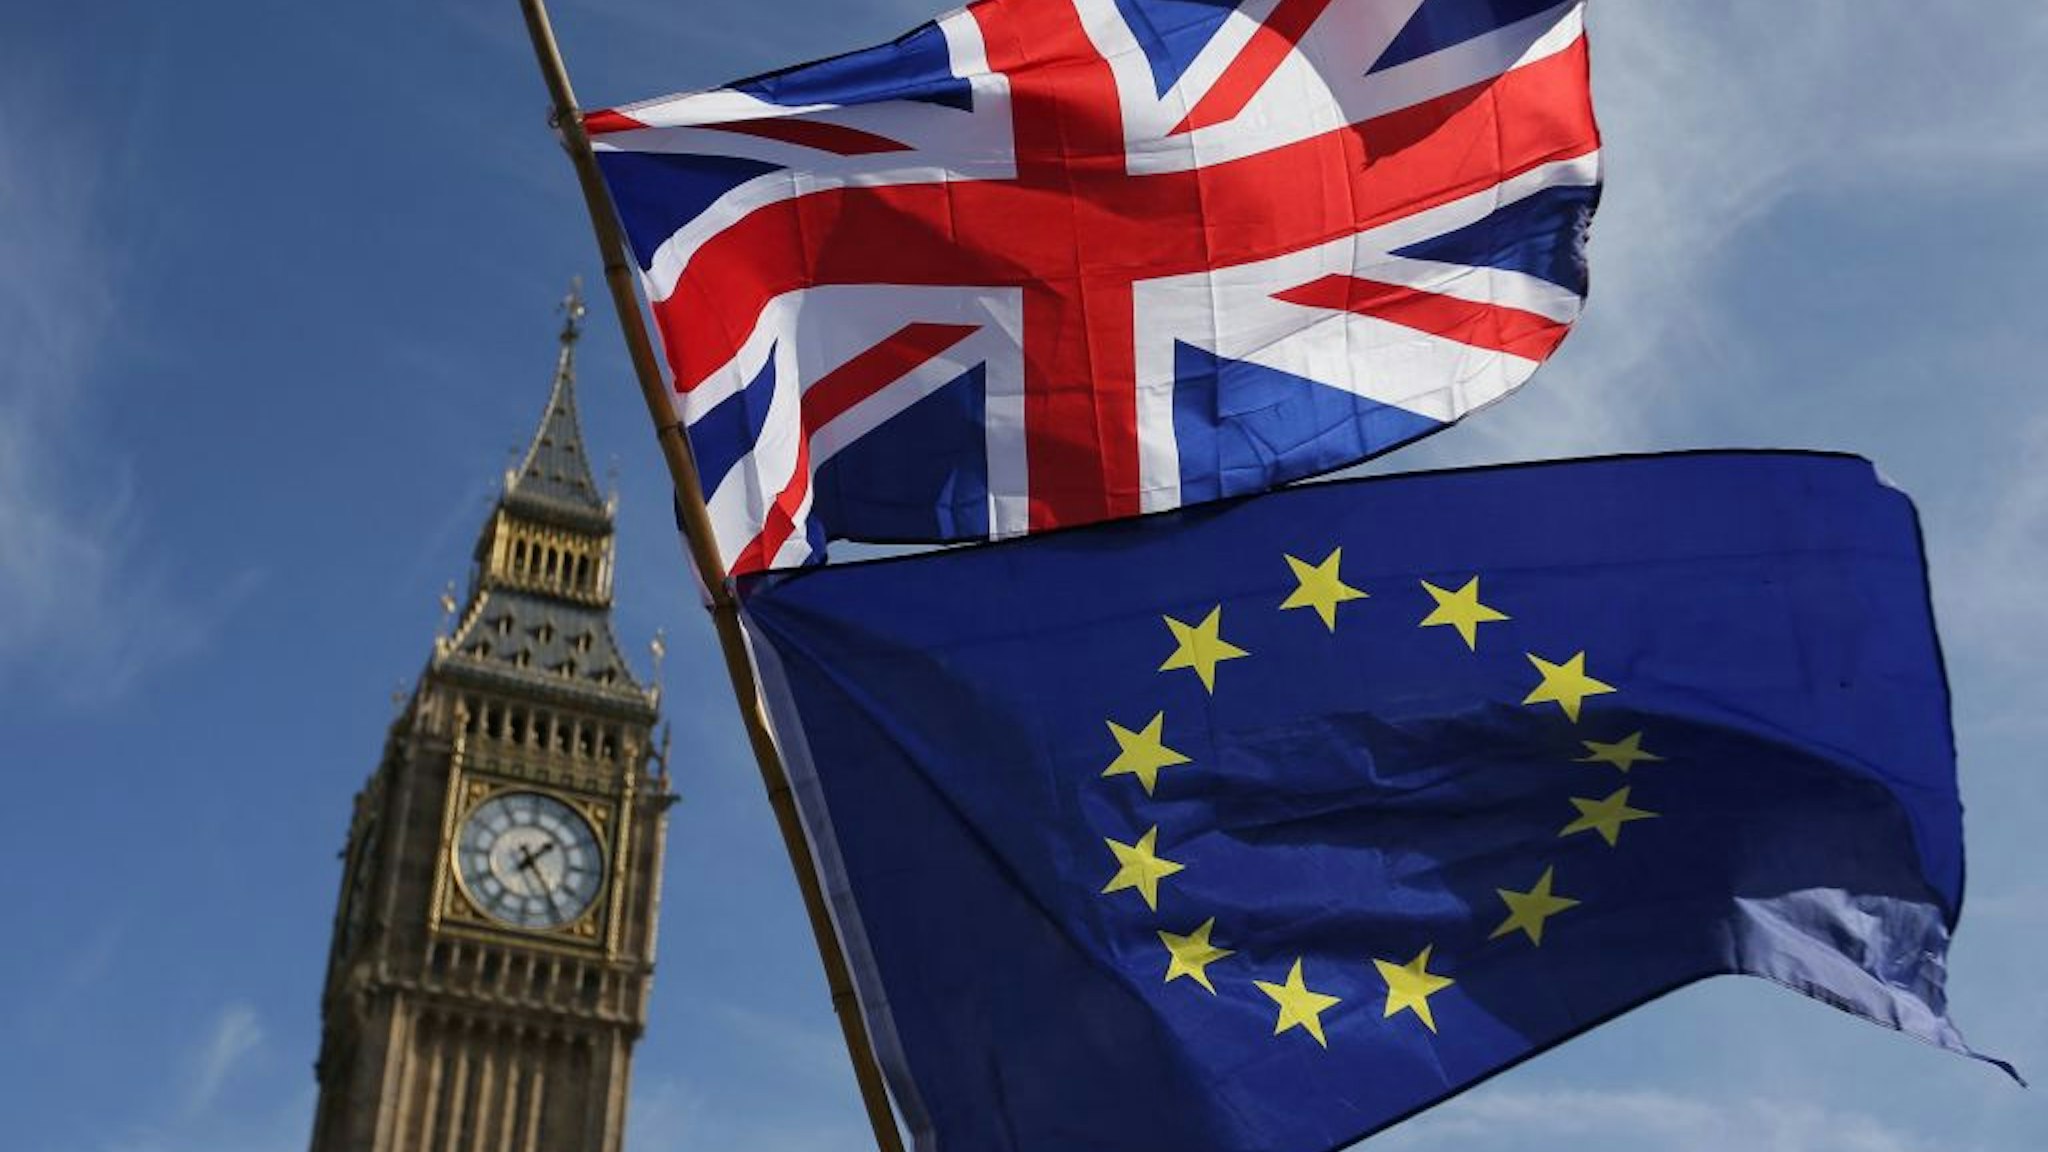 TOPSHOT - An EU flag and a Union flag held by a demonstrator is seen with Elizabeth Tower (Big Ben) and the Houses of Parliament as marchers taking part in an anti-Brexit, pro-European Union (EU) enter Parliament Square in central London on March 25, 2017, ahead of the British government's planned triggering of Article 50 next week. - Britain will launch the process of leaving the European Union on March 29, setting a historic and uncharted course to become the first country to withdraw from the bloc by March 2019.